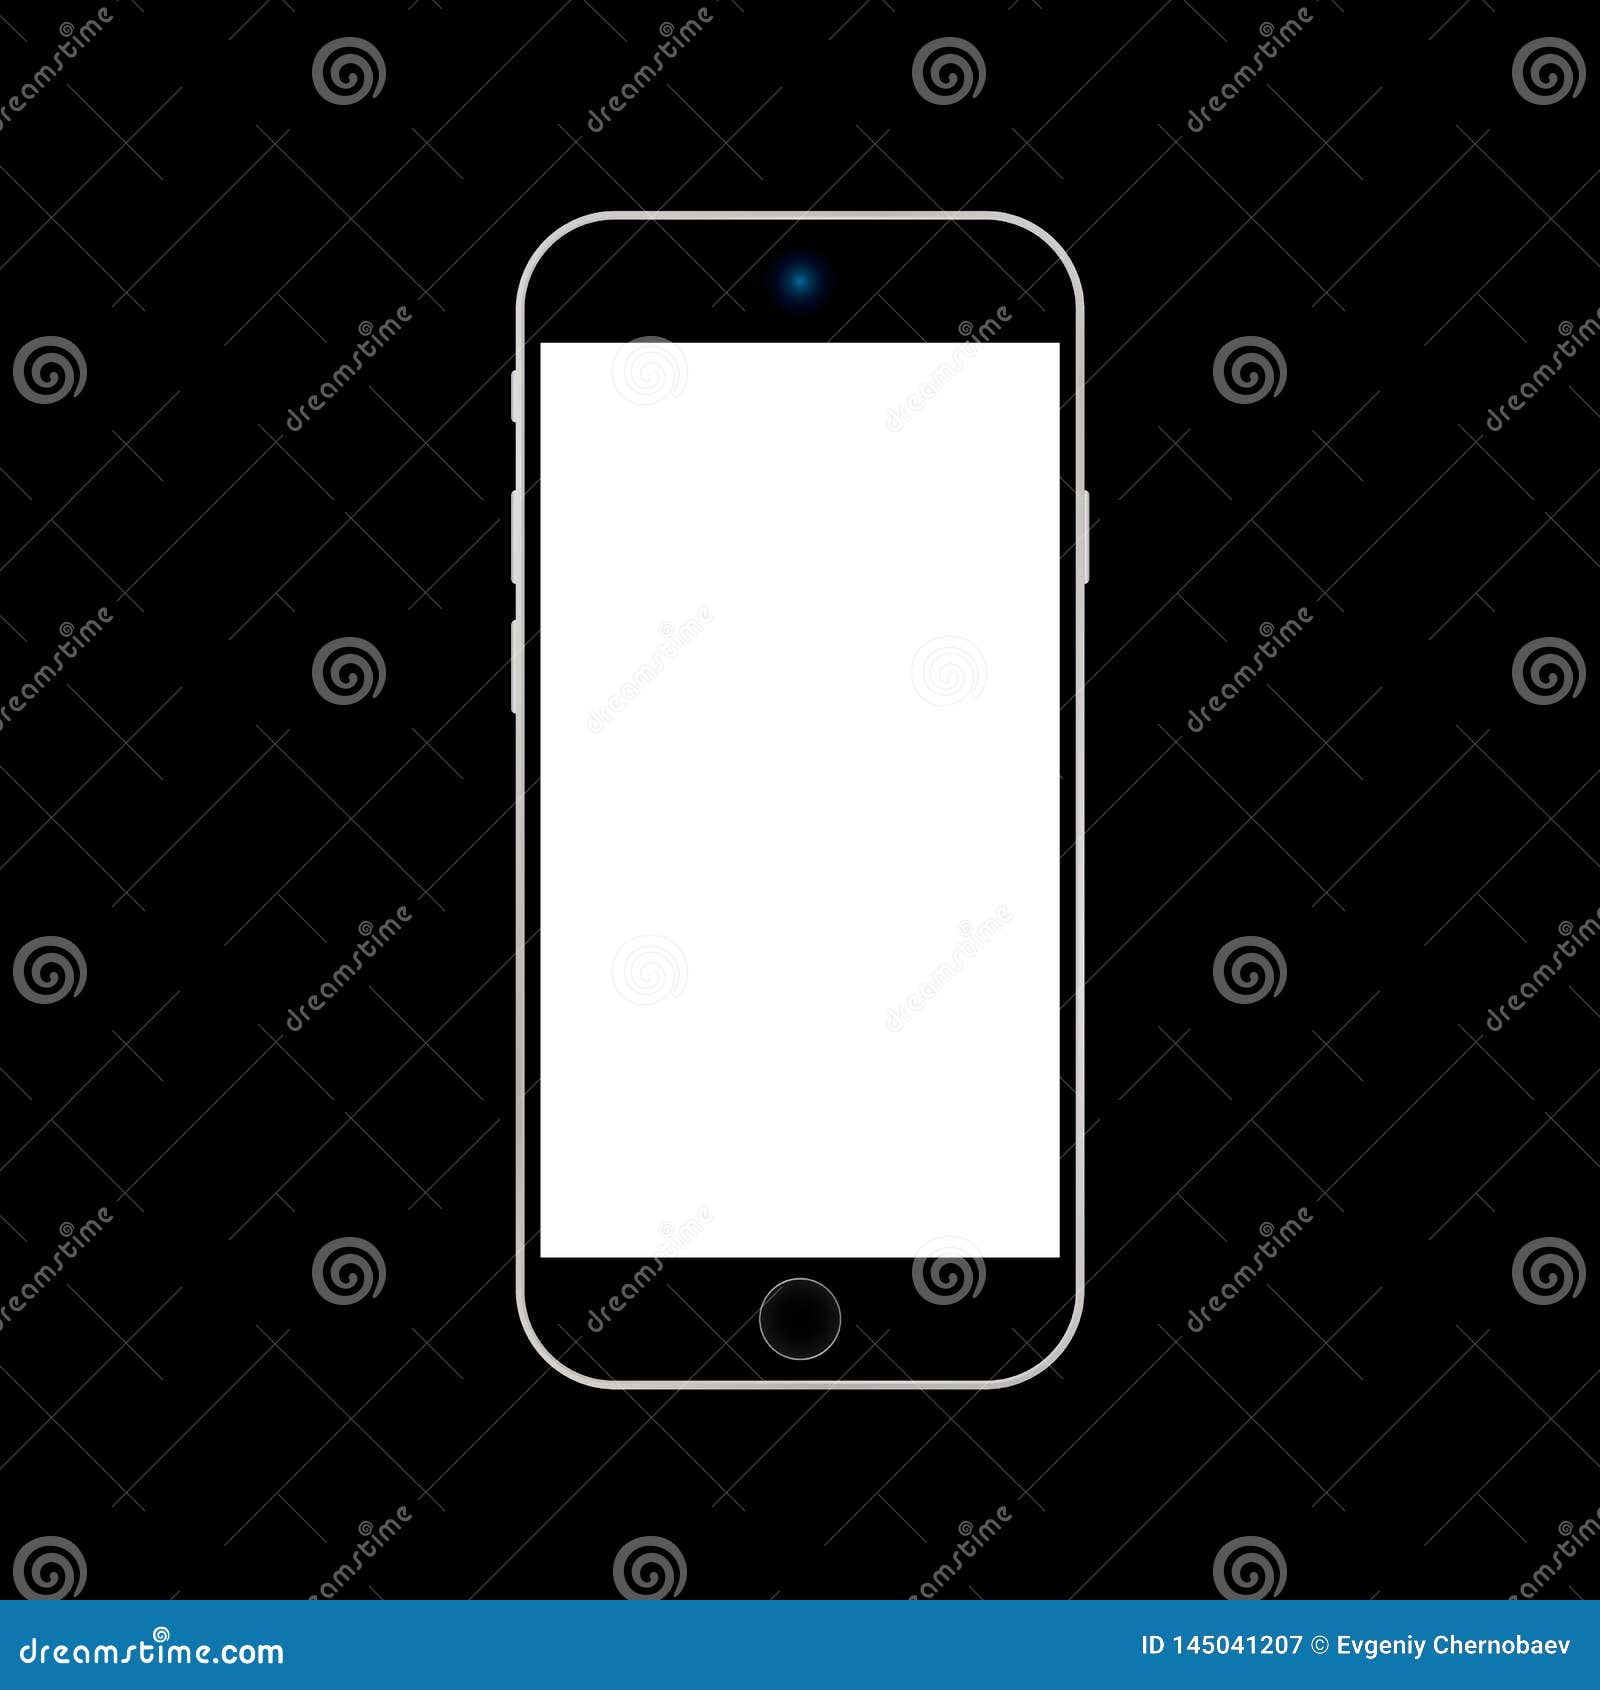 Black Iphone Smartphone With White Screen On Black Background Vector Eps10 Black Smartphone Iphone Icon Stock Vector Illustration Of Device Connection